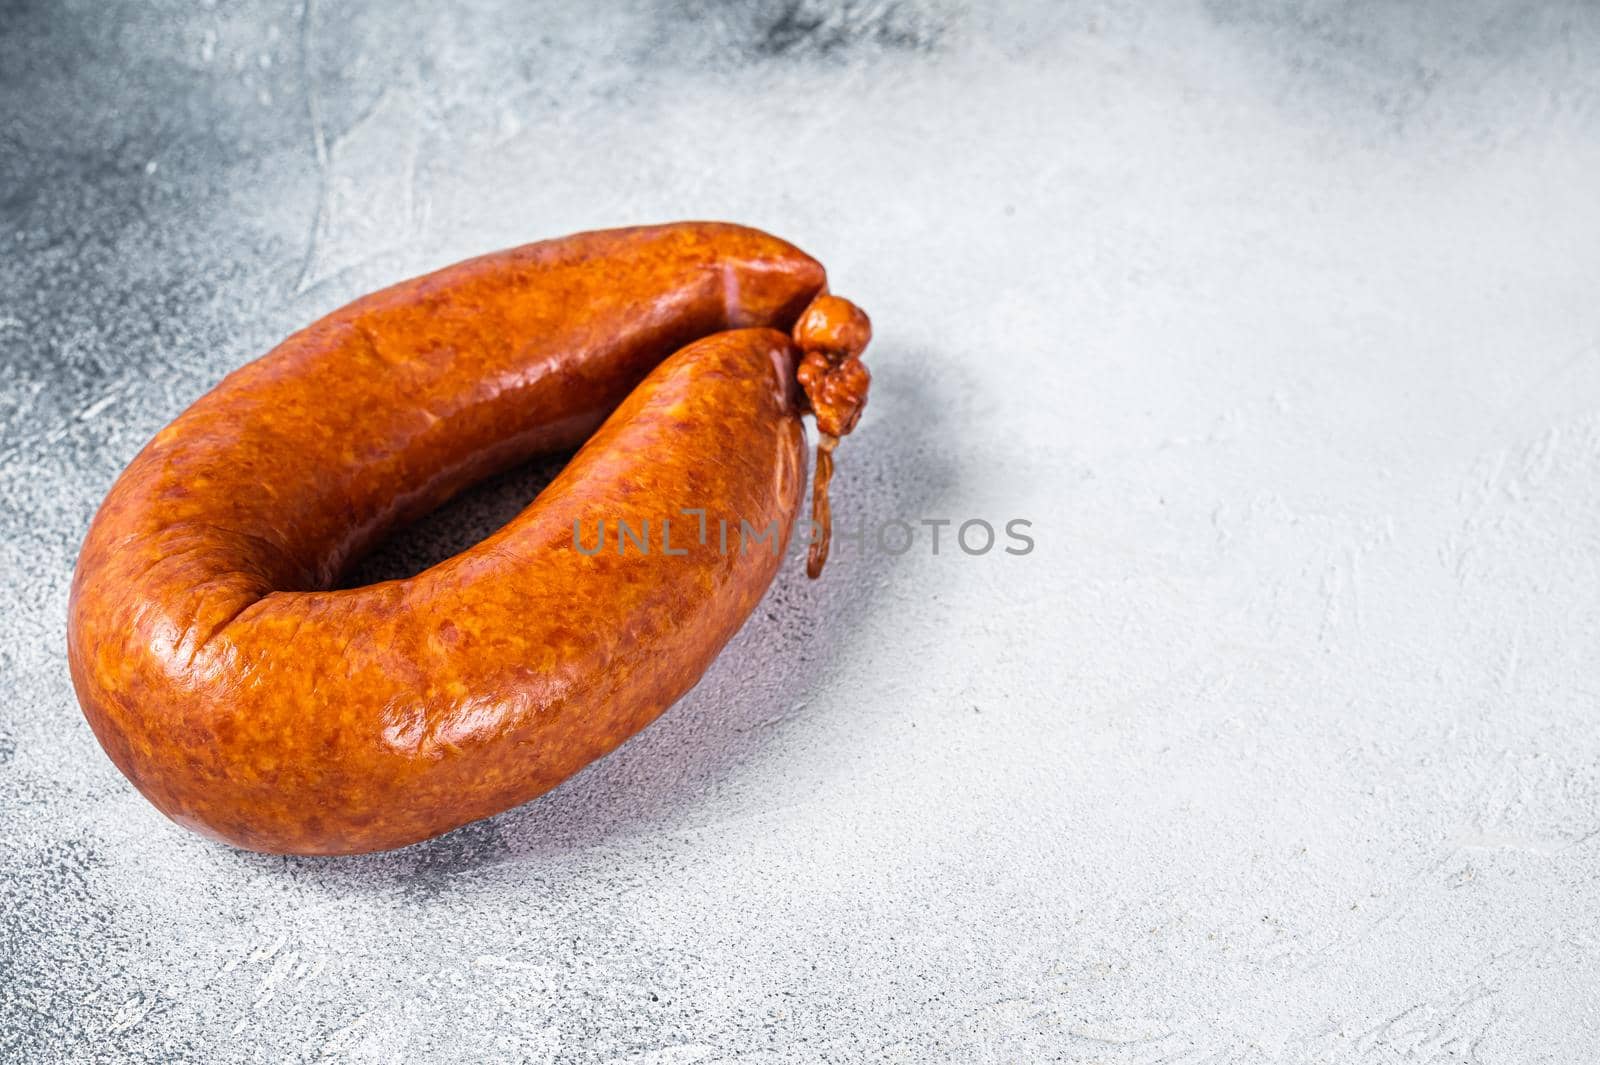 Smoked sausage on a white rustic table. White background. Top view. Copy space by Composter